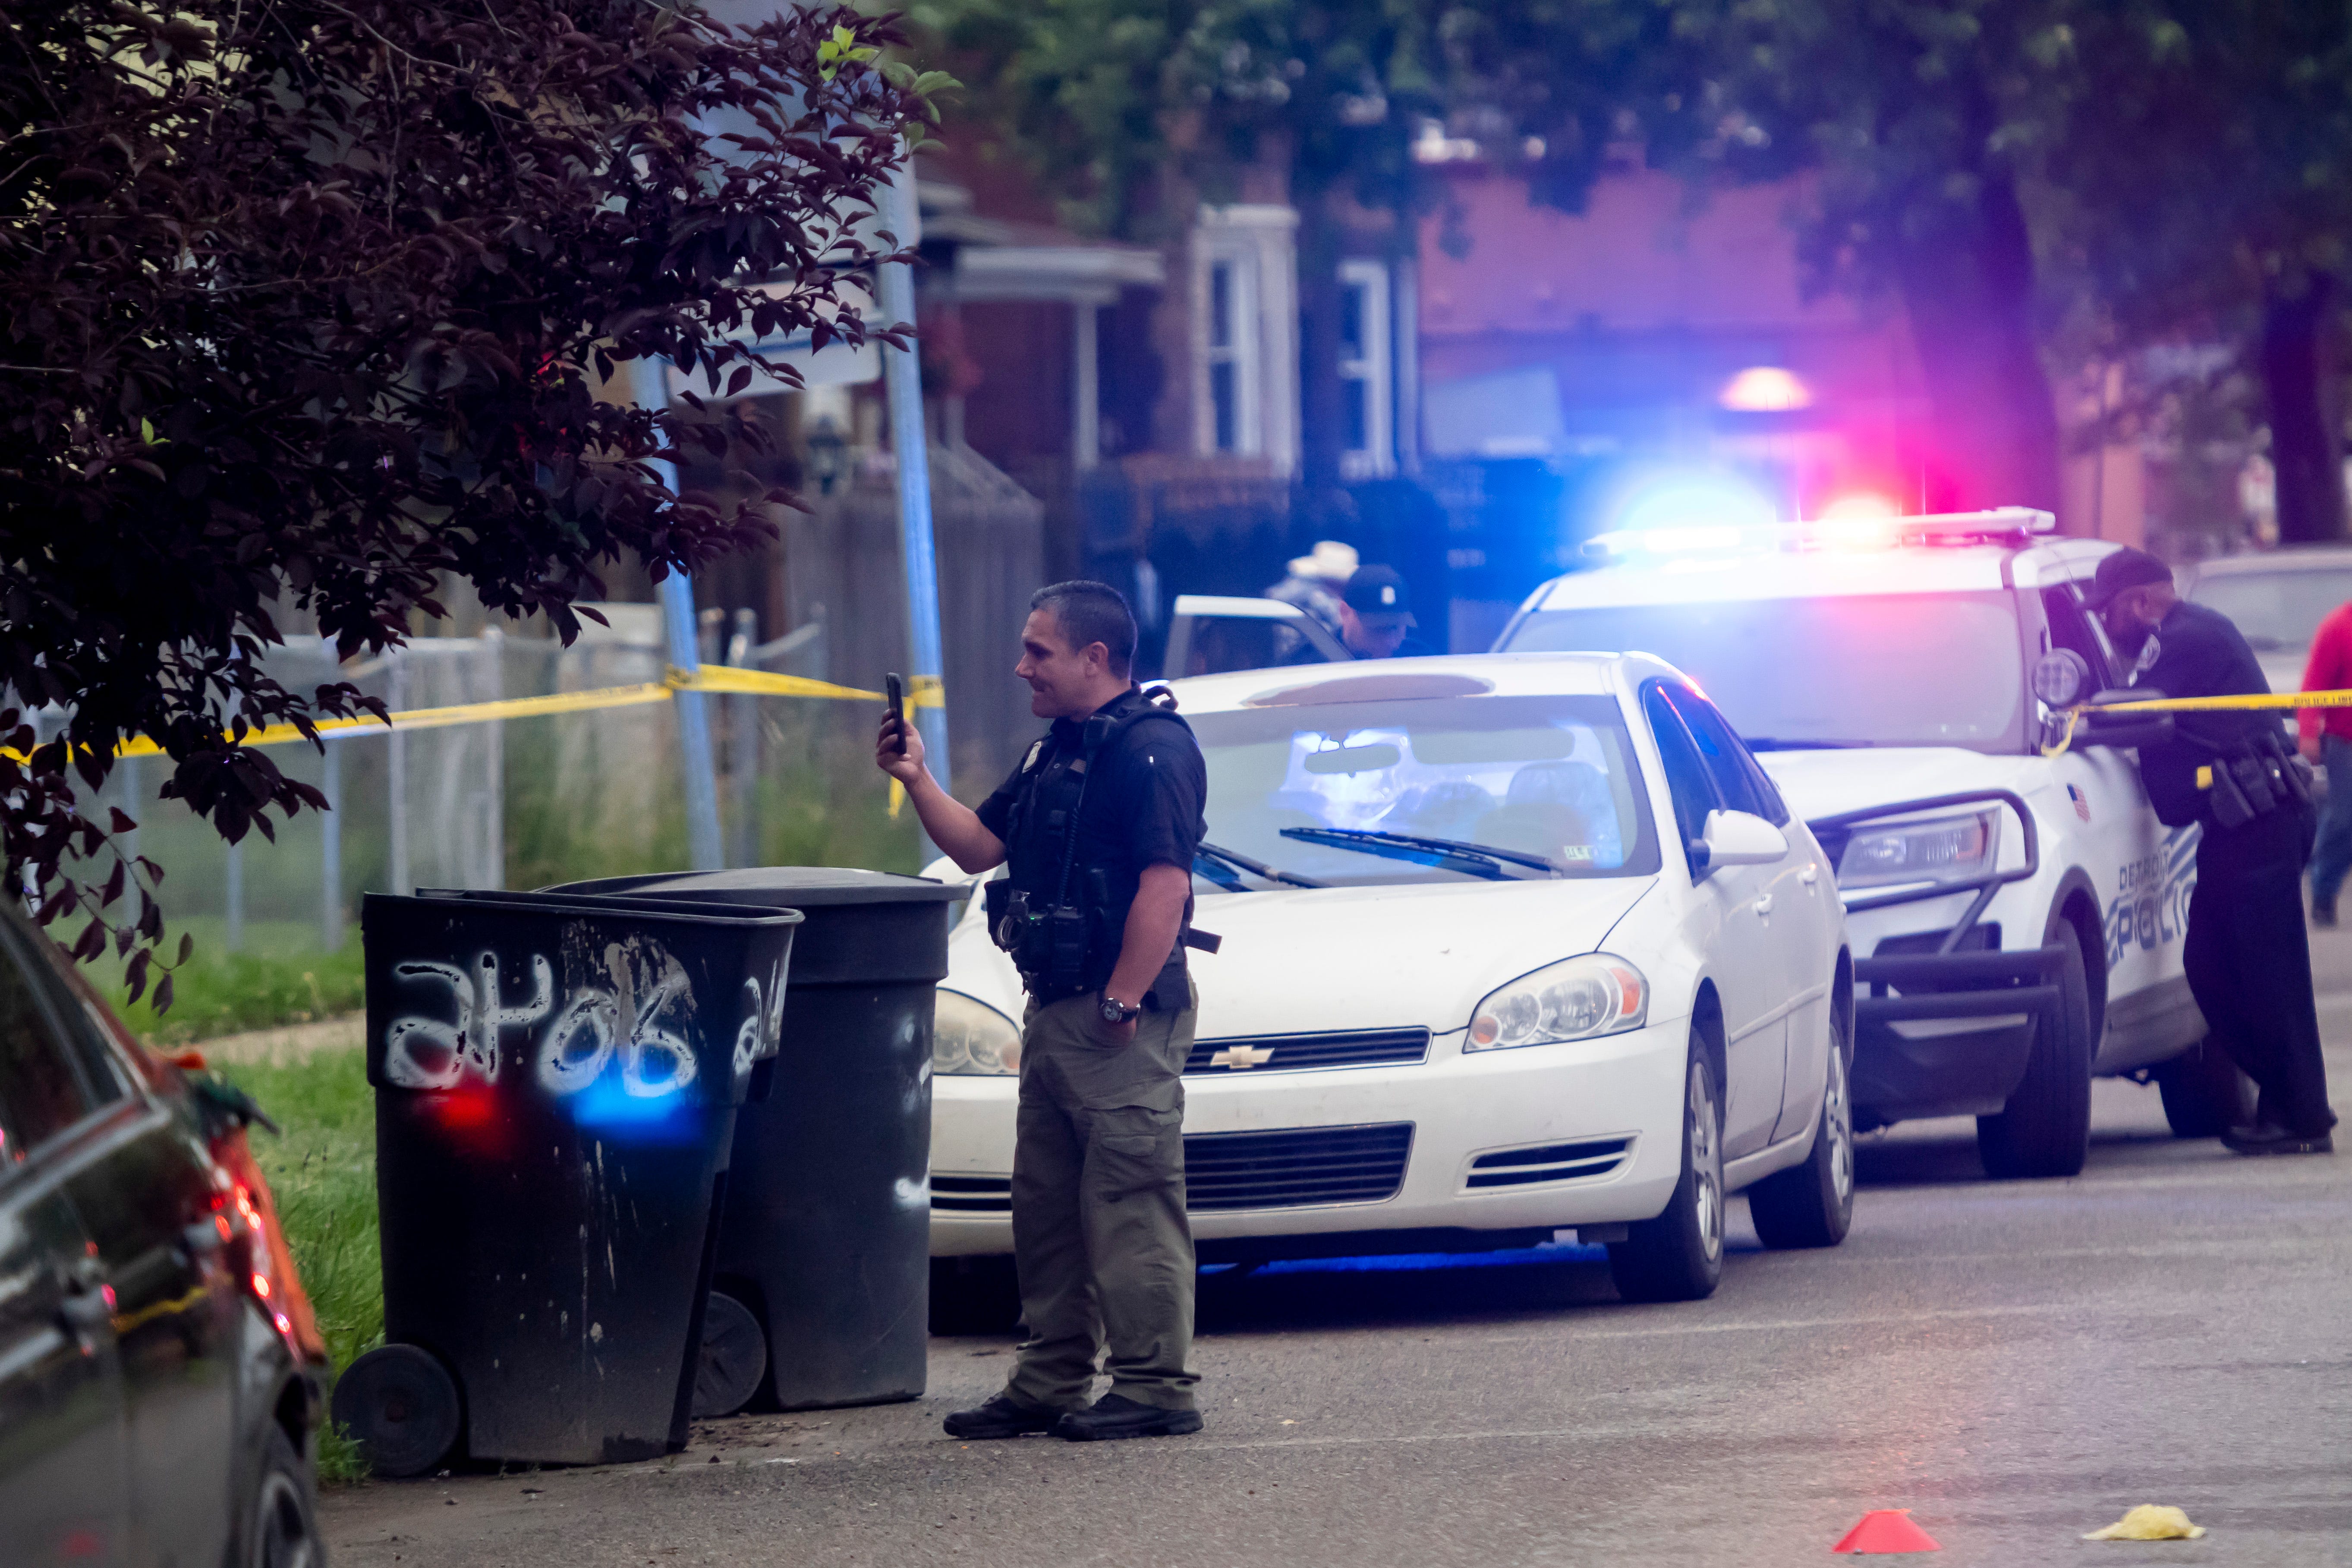 Detroit police investigate a shooting on the 2400 block of Honorah, in Detroit, June 20, 2019. The attempted robbery on the city's southwest side left the suspect dead and a 15-year-old seriously injured.